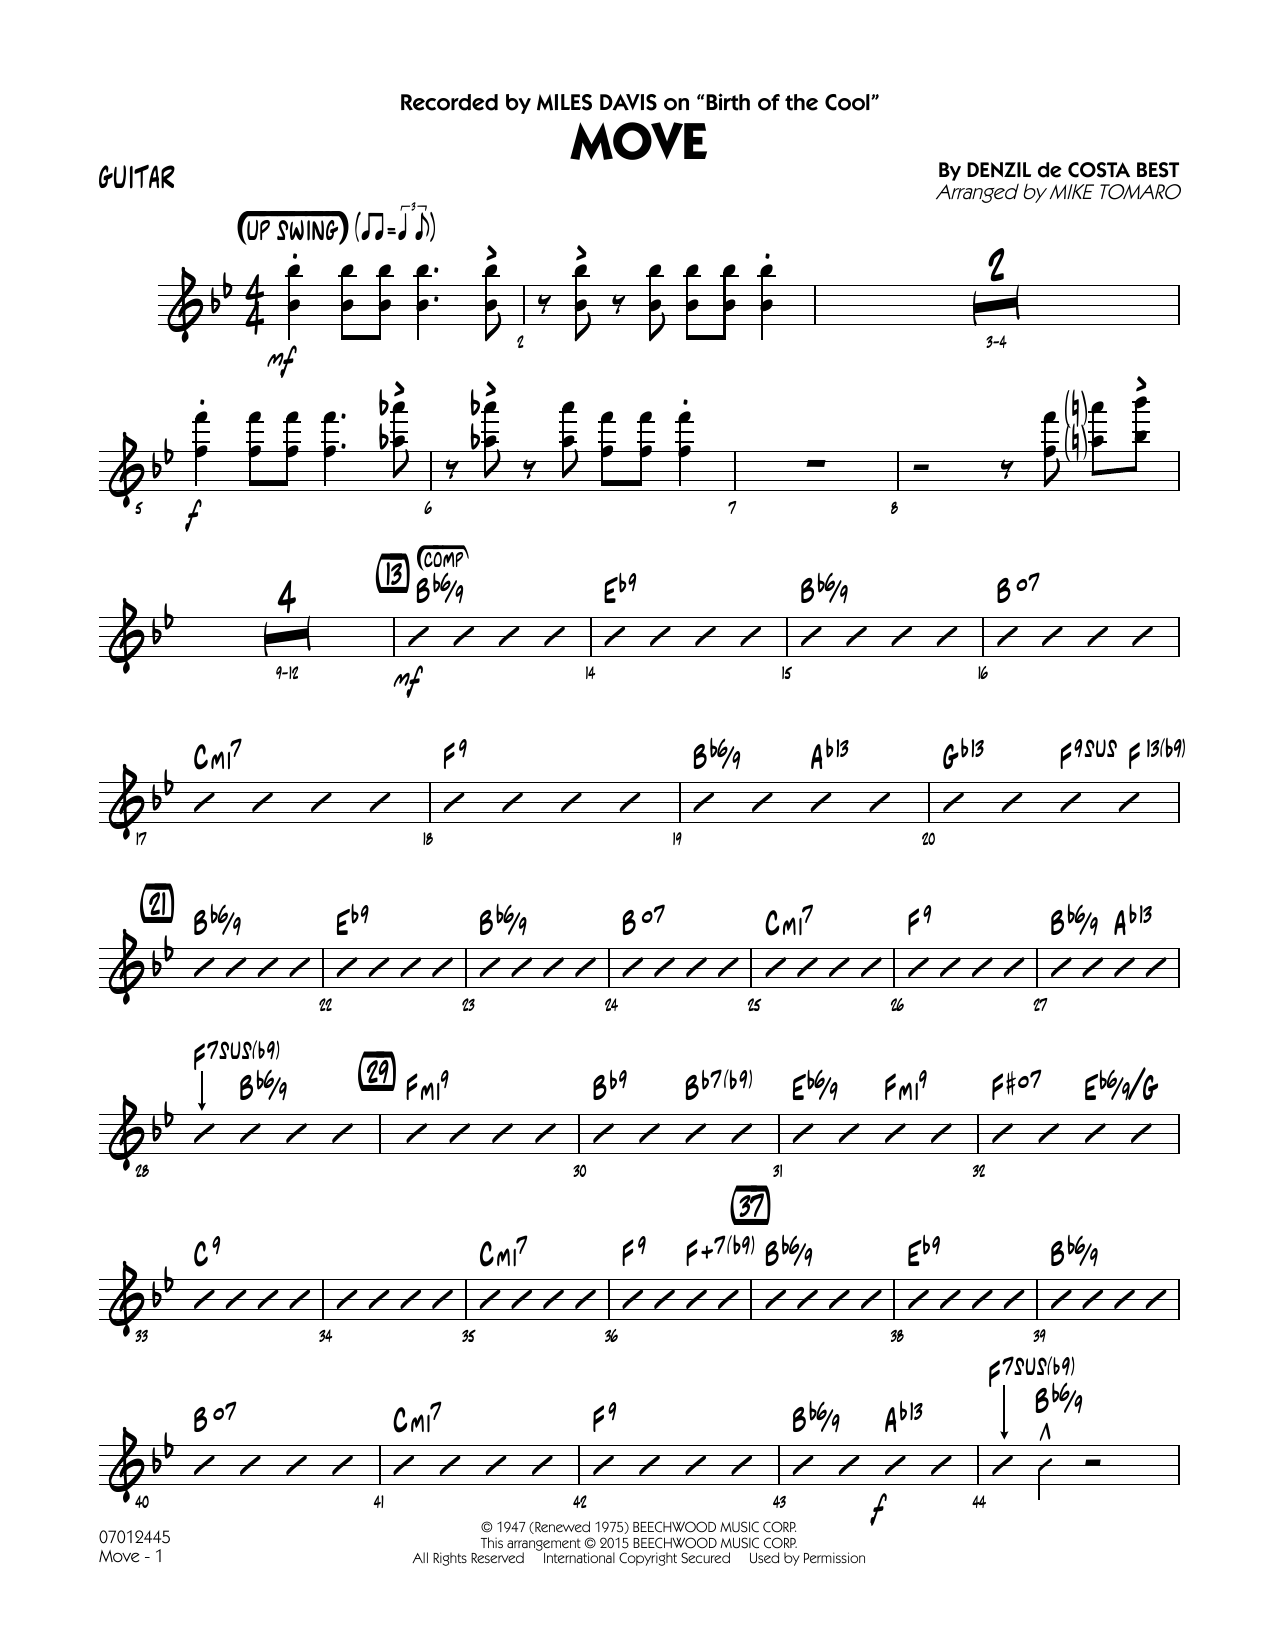 Mike Tomaro Move - Guitar sheet music notes and chords. Download Printable PDF.